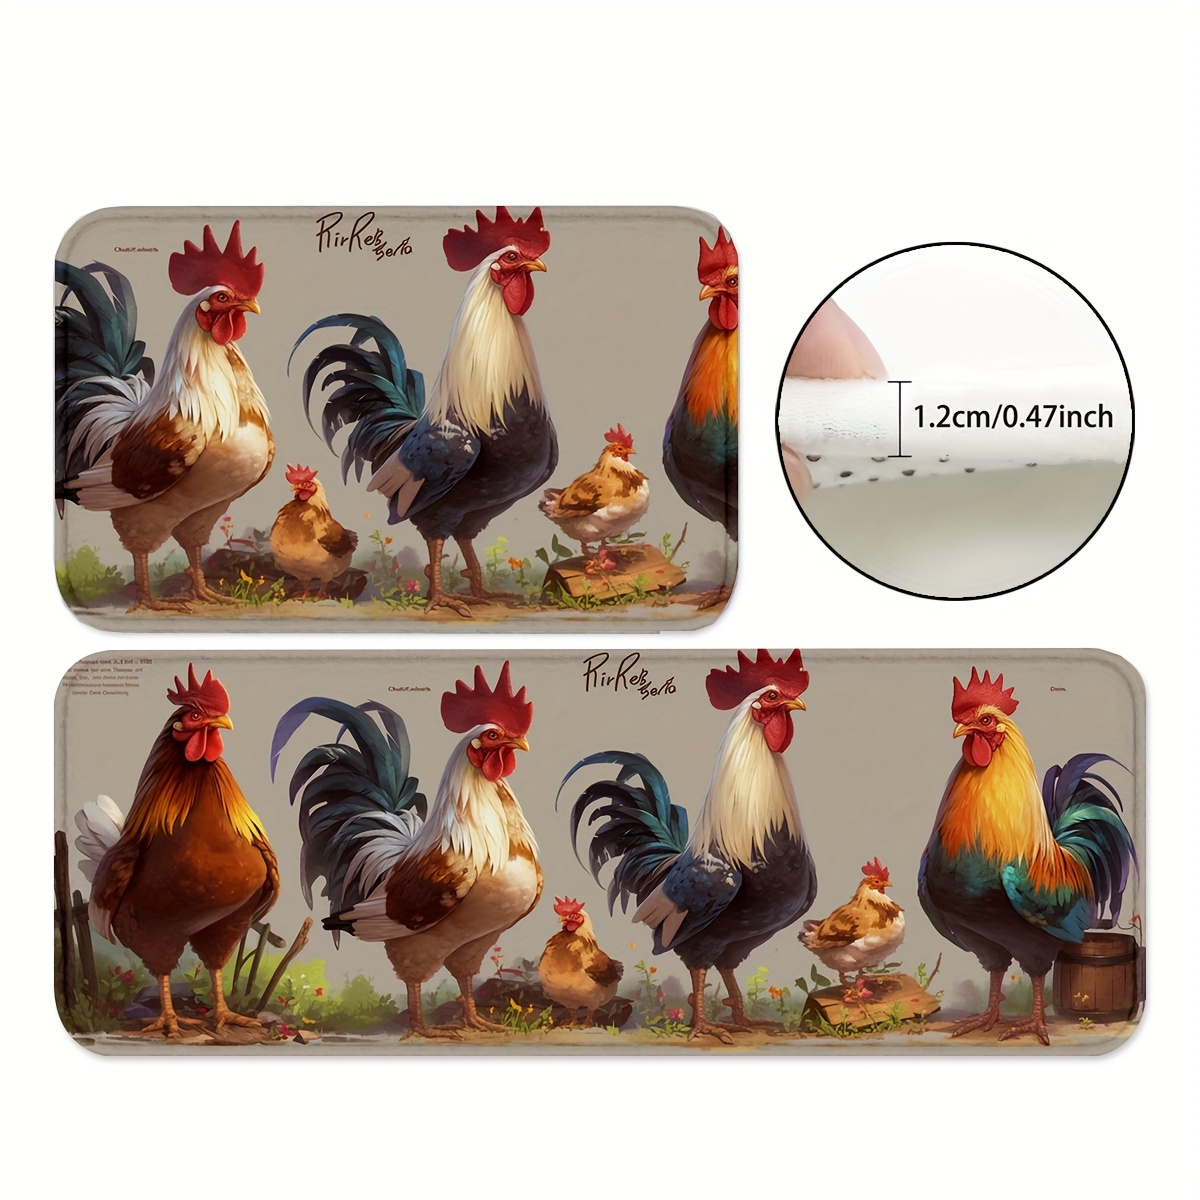 

1/2pcs, Rooster Kitchen Rugs And Mats, Non Skid Washable Absorbent Microfiber Kitchen Mat For Floor, Non-shed, Non-slip, Family & Pet Friendly - Premium Recycled Fibers - Home Decor, Room Decor